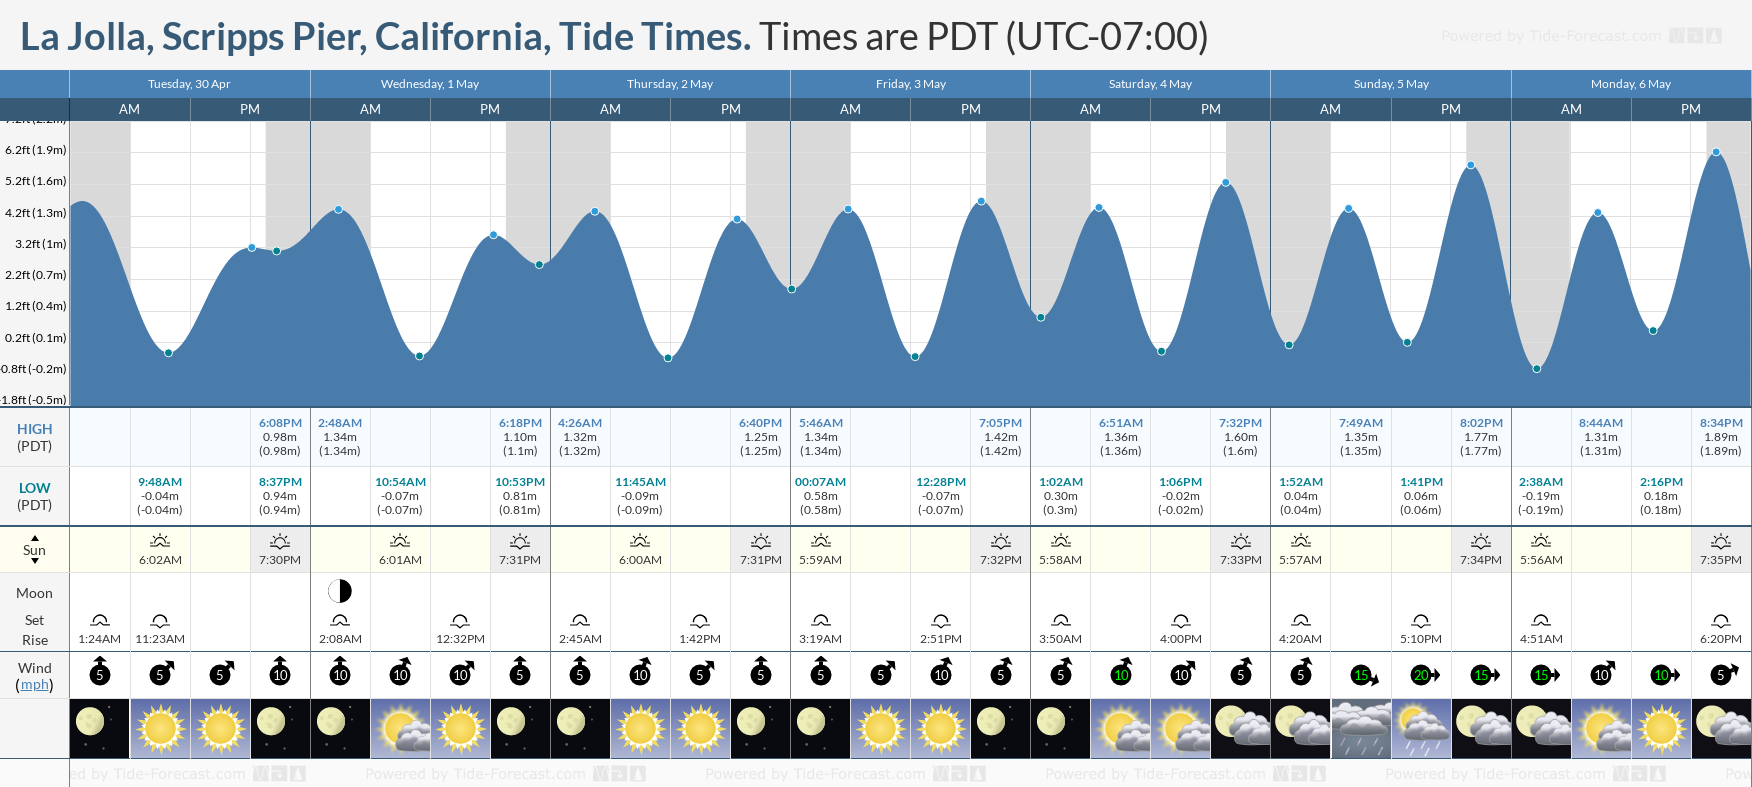 La Jolla, Scripps Pier, California Tide Chart including high and low tide times for the next 7 days